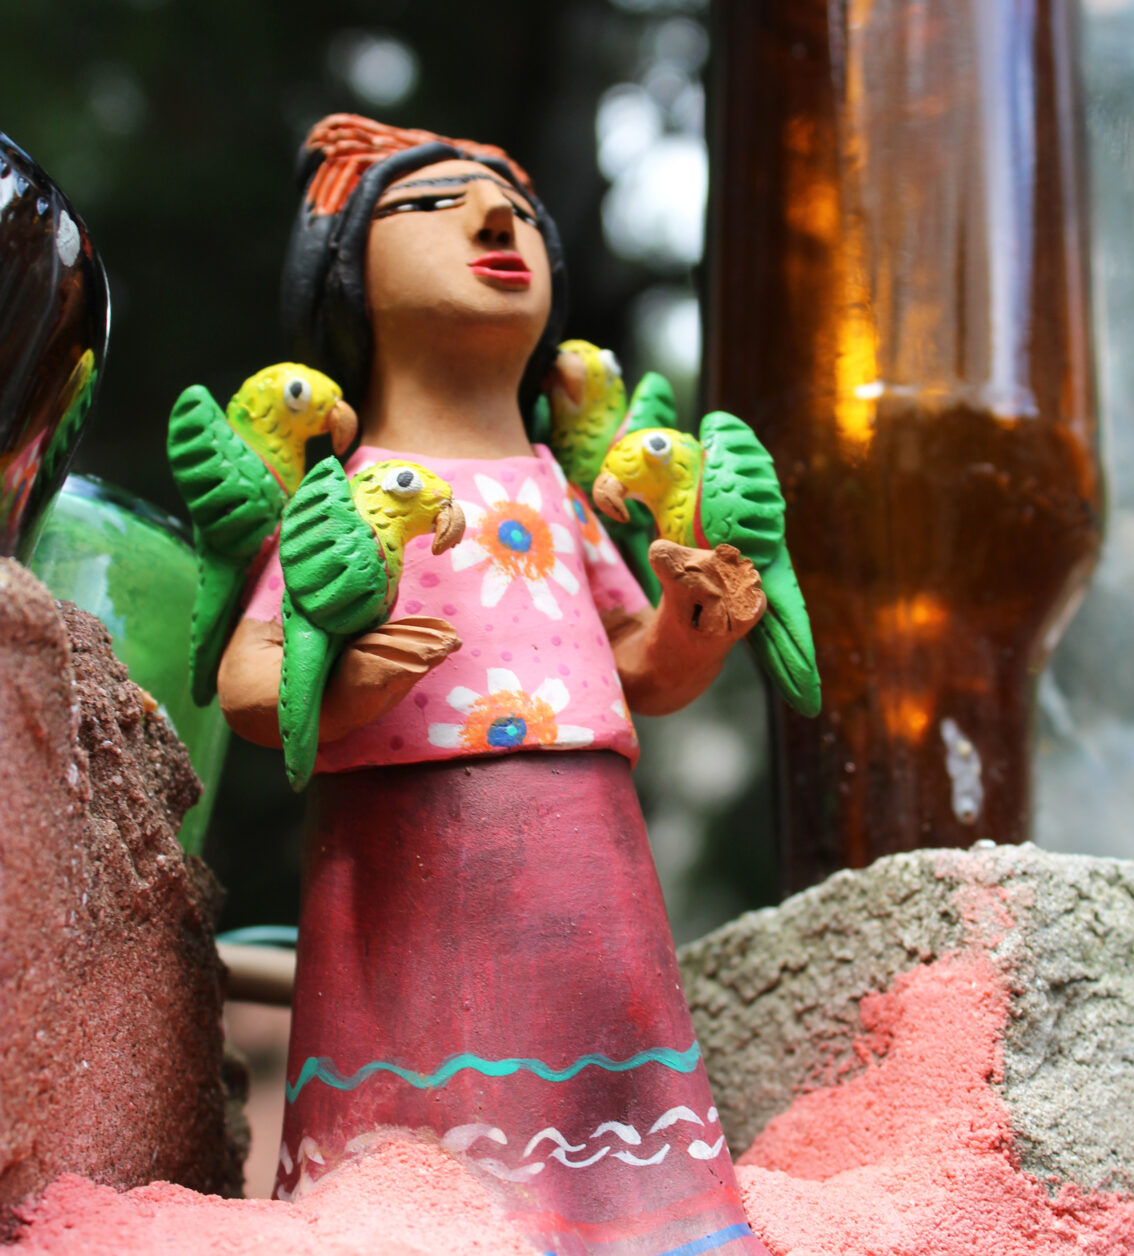 A ceramic folk art statuette depicting a woman in a pink dress holding yellow and green parrots.